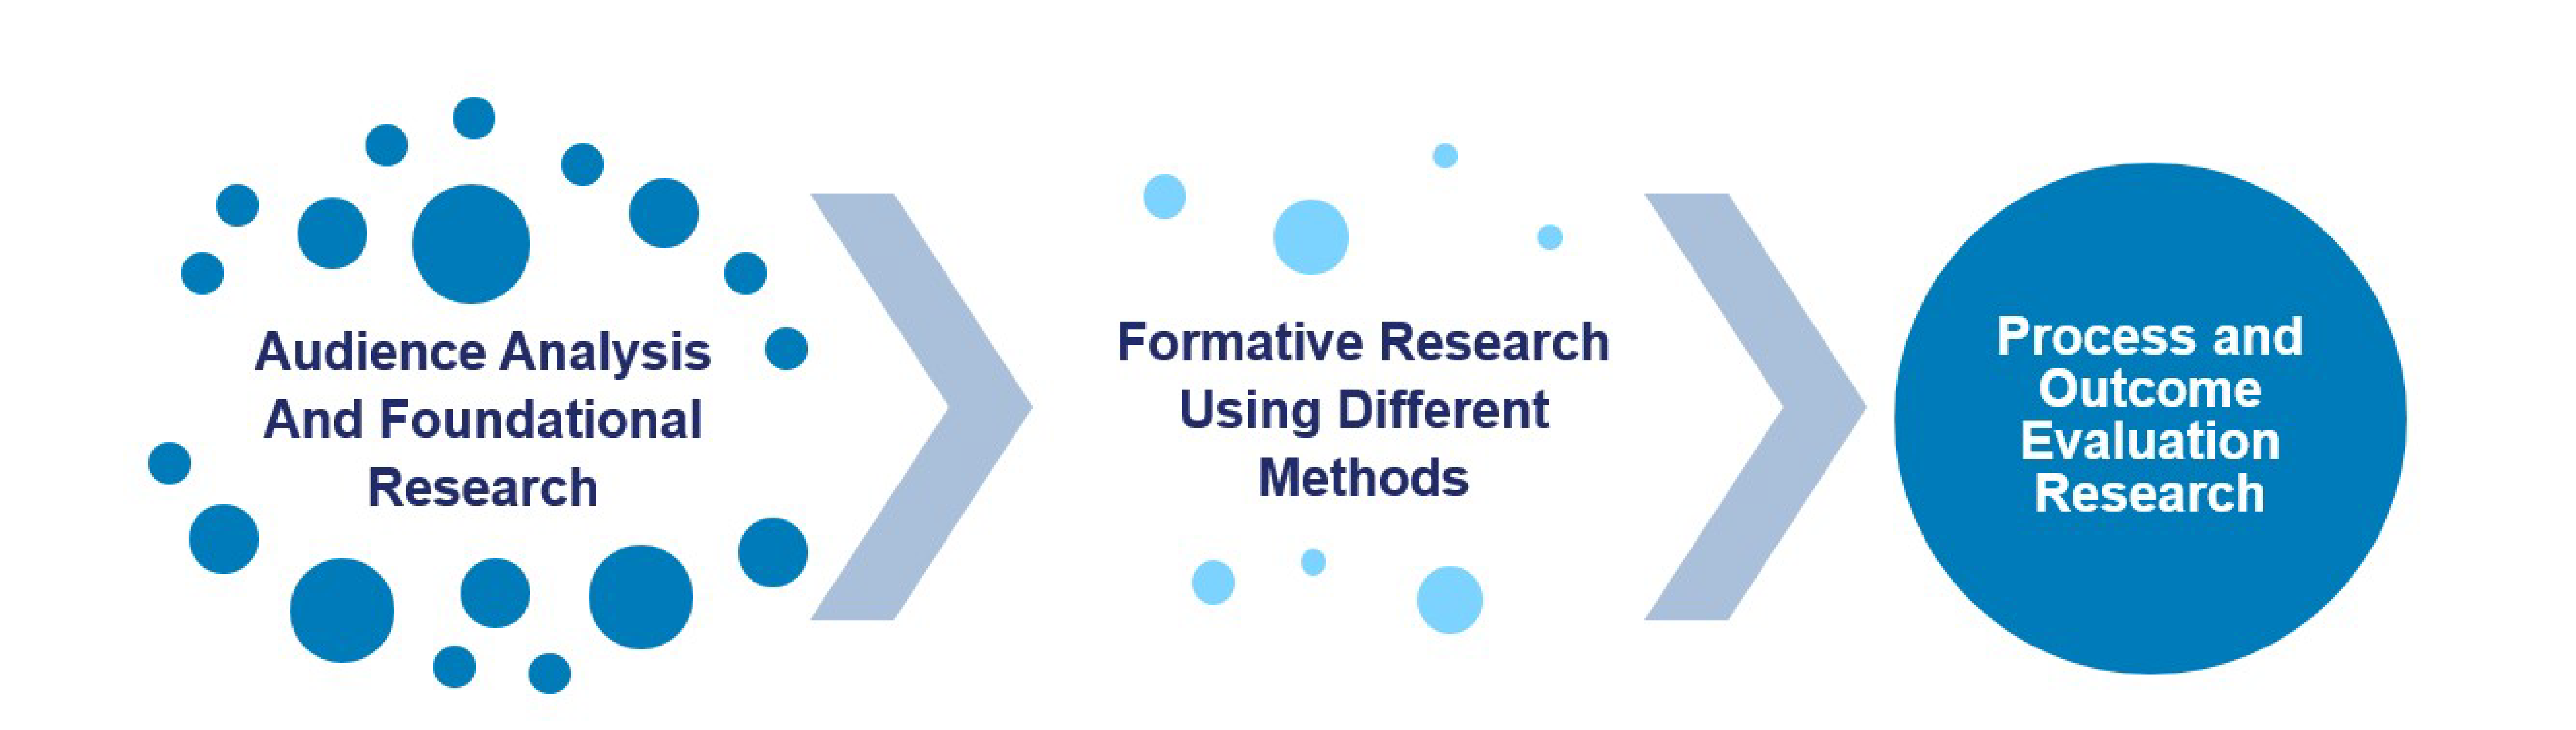 Audience Analysis and Foundational Research > Formative Research Using Different Methods > Process and Outcome Evaluation Research